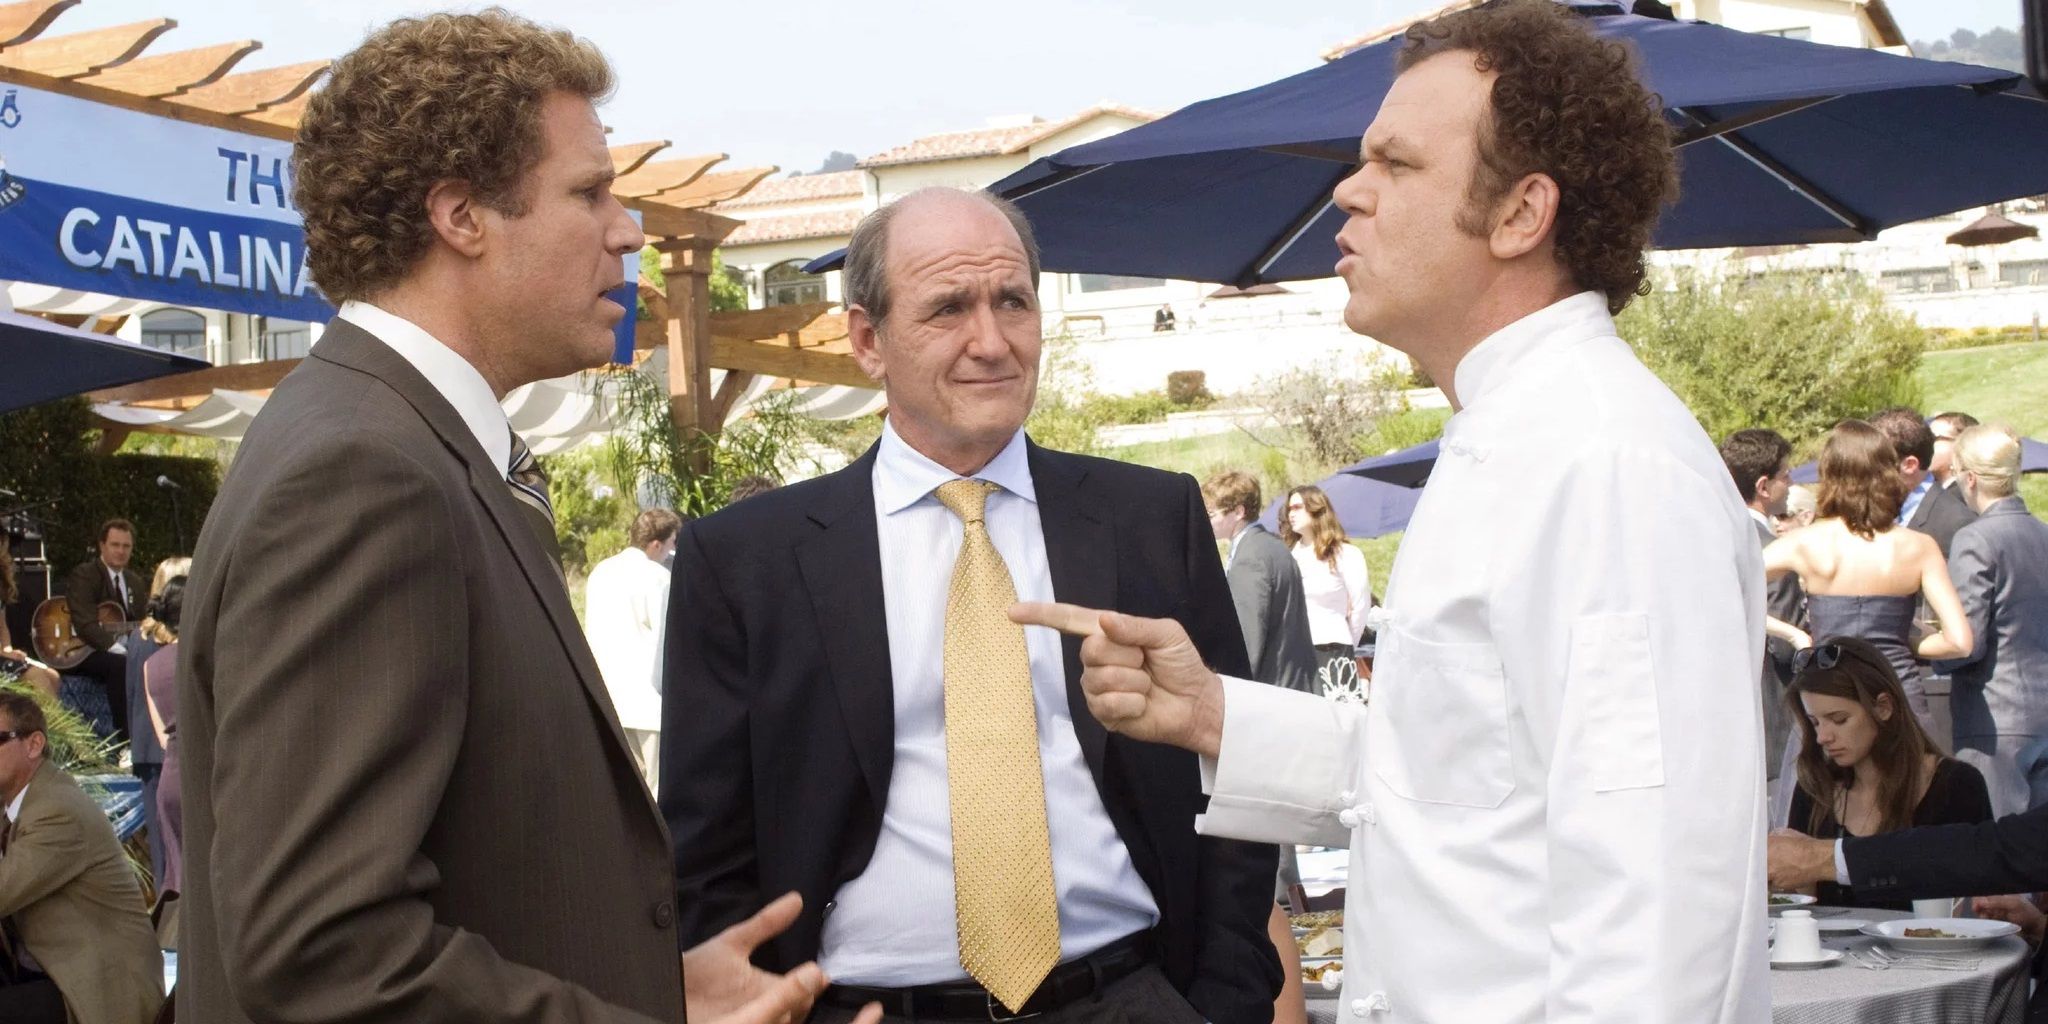 Brennan, Dale, and Robert in Step Brothers